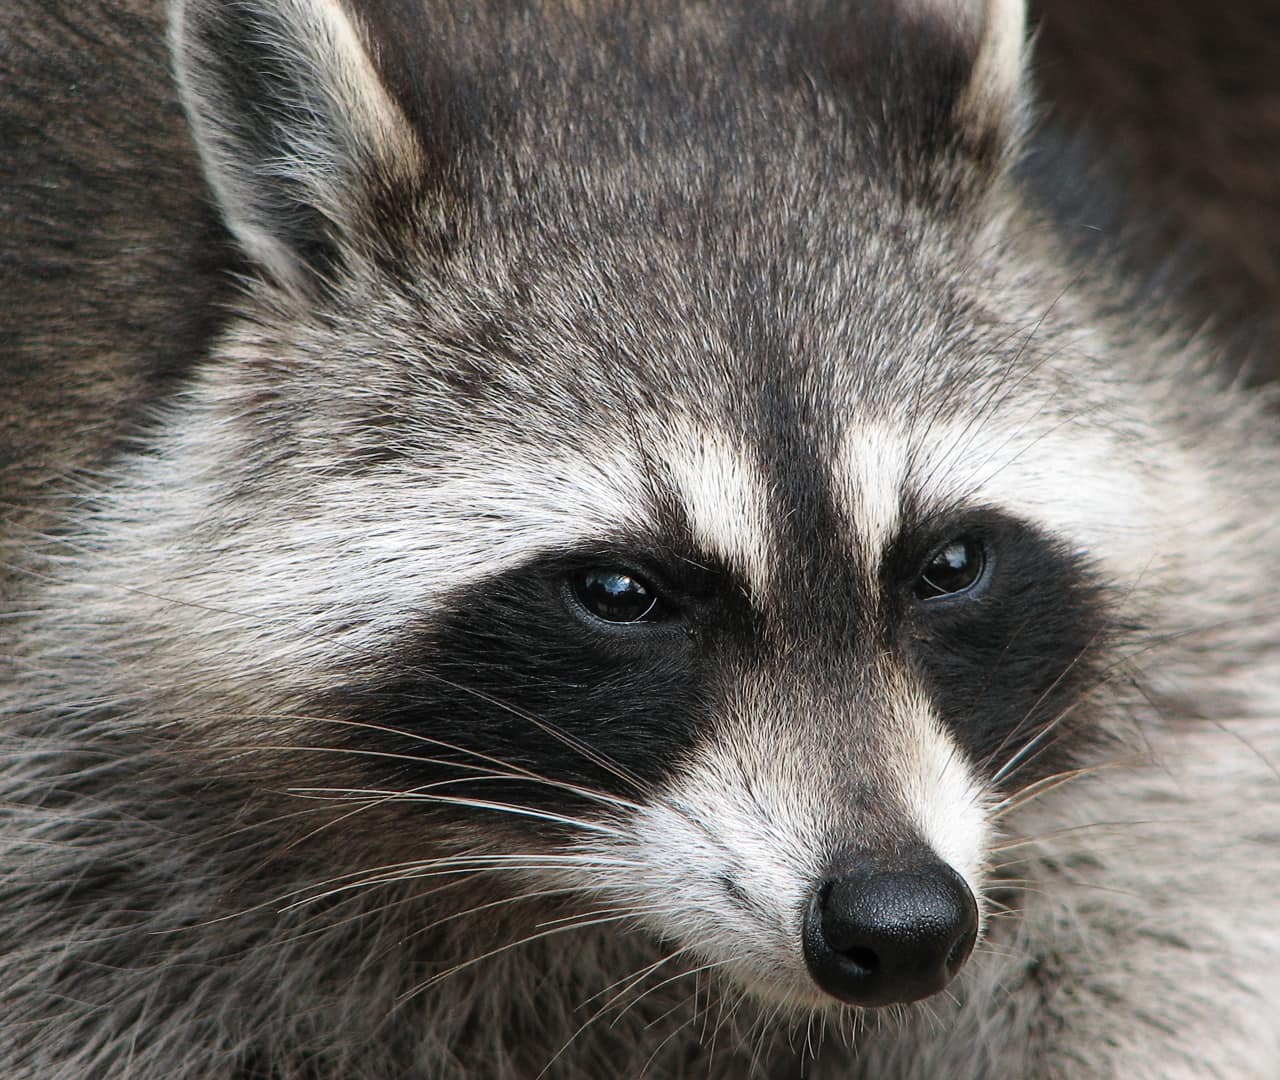 The raccoon that attacked a 6-year-old Elmwood Park boy walking to school Wednesday tested positive for rabies.